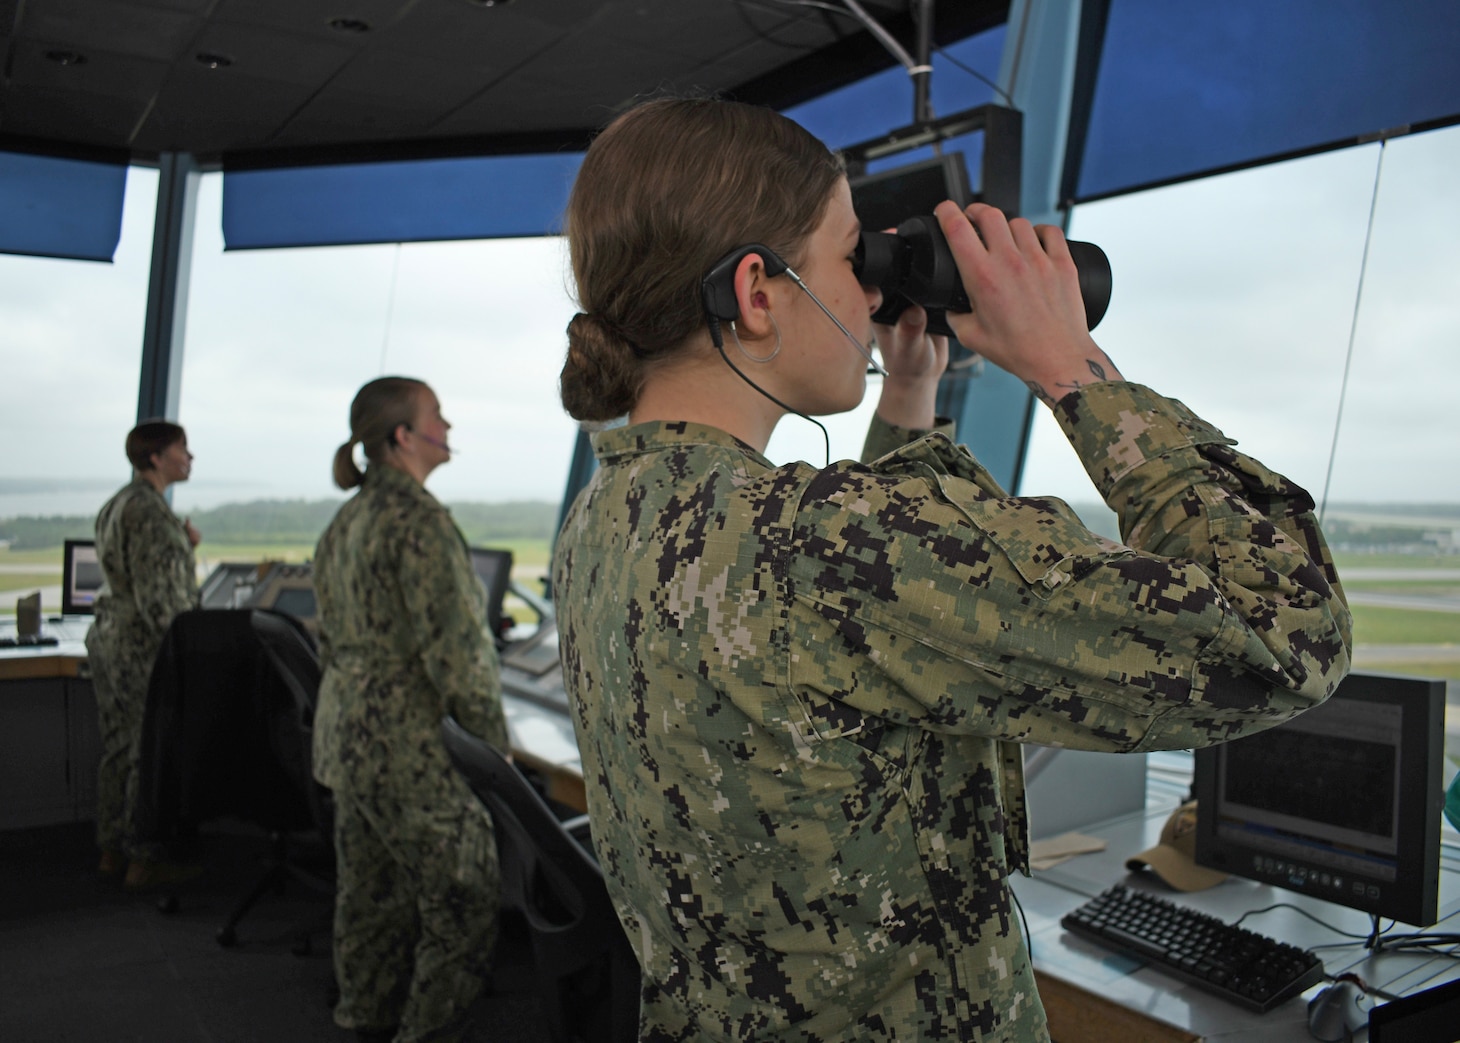 On May 30, for the first time in Naval Air Station Patuxent River’s 80-year history, its Air Traffic Control Facility (ATCF) was completely staffed by women. The Air Traffic Controllers (ACs) served in nine watch stations between the NAS Pax River Air Traffic Control Tower, Radar Operations and Flight Planning.